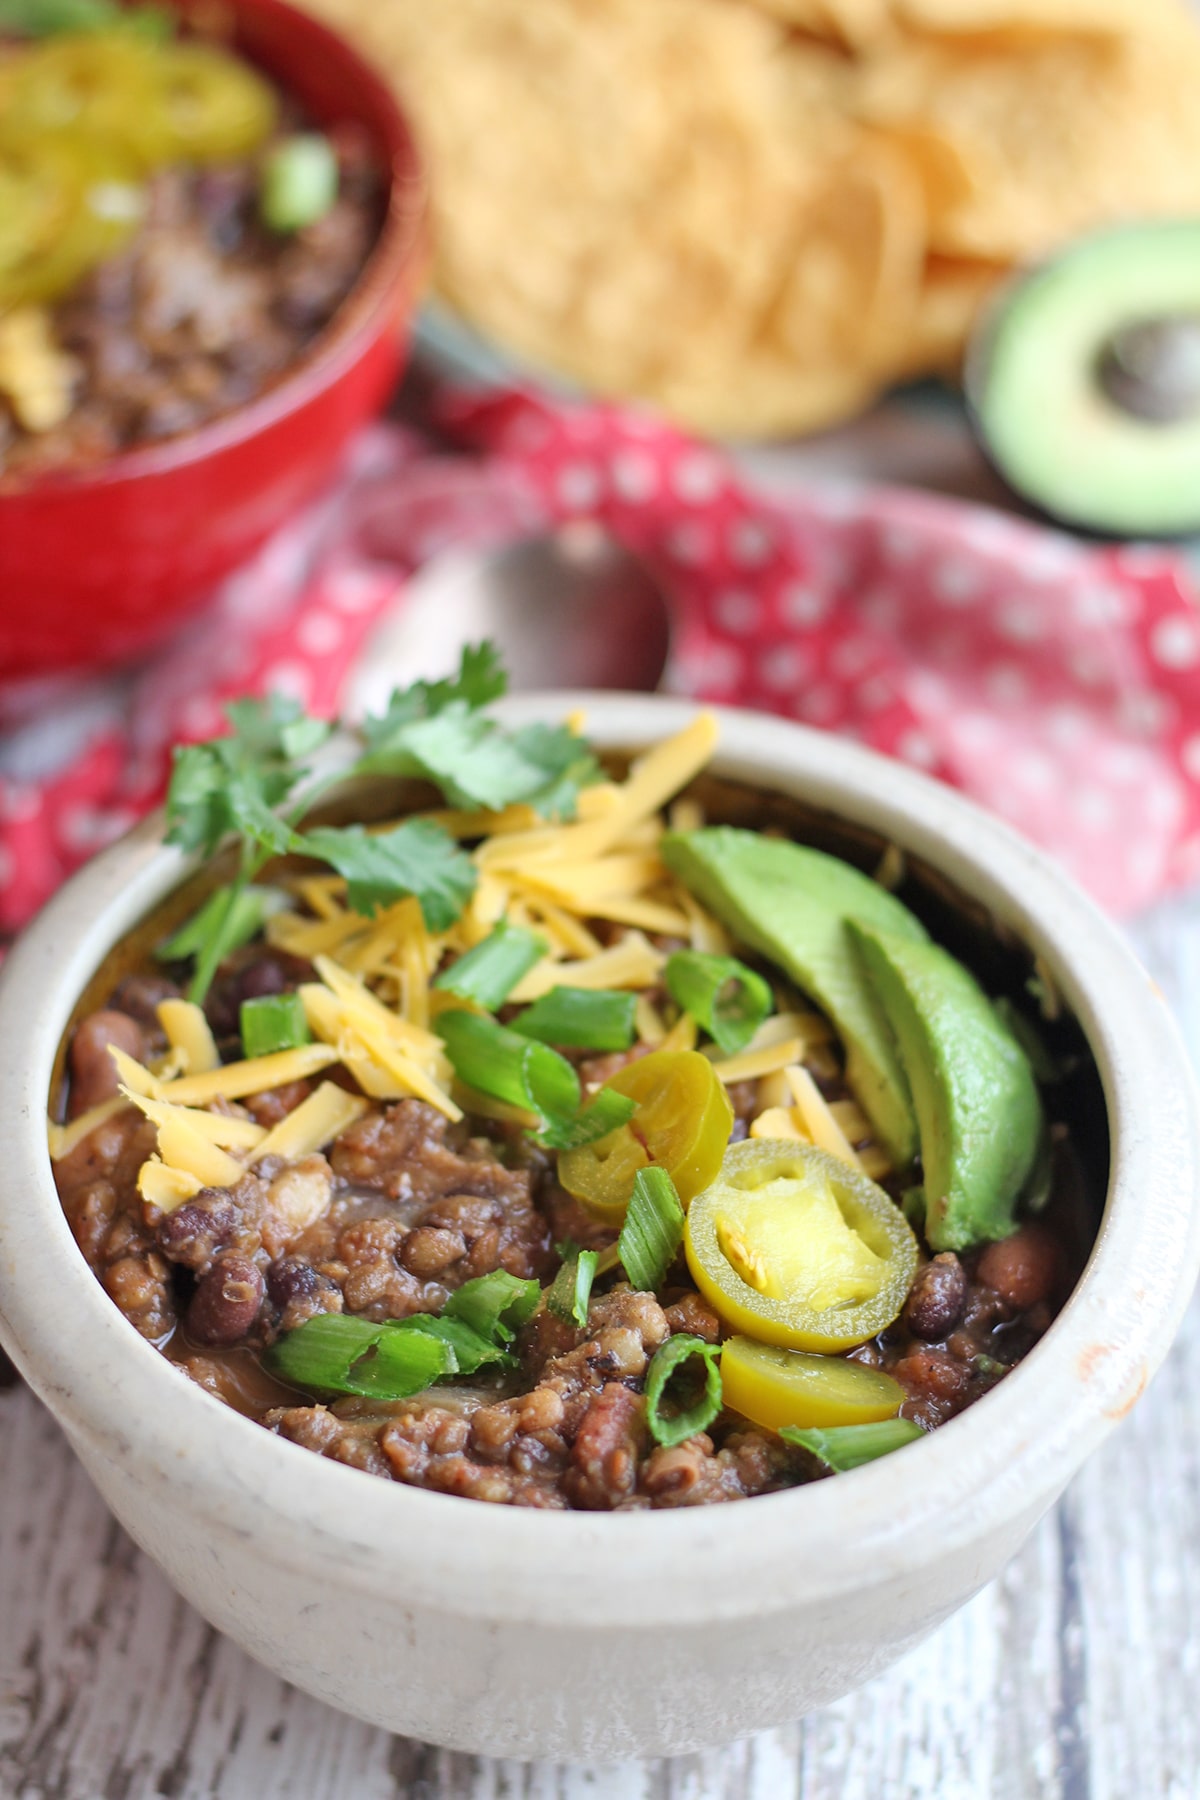 Avocado and vegan cheese on lentil chili.